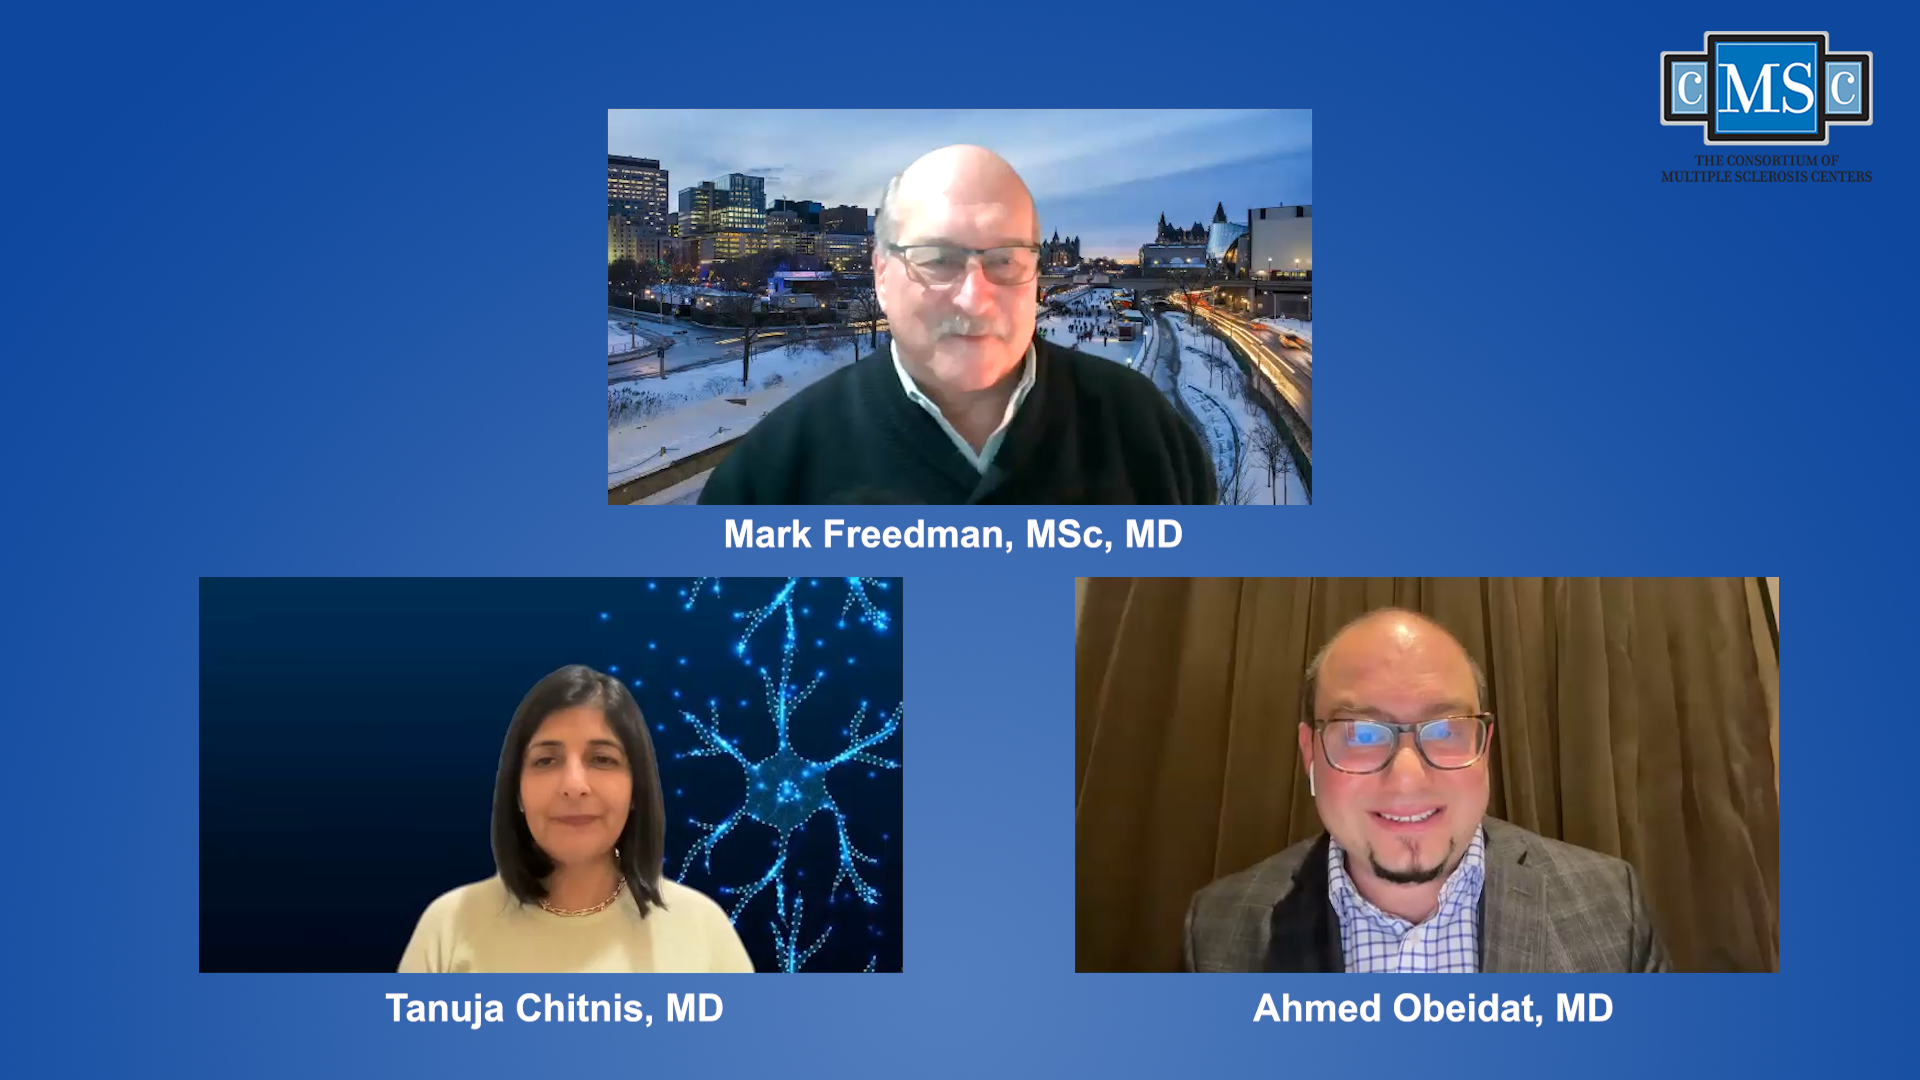 Question and Answer about Neurofilament Light Chain and Other MS Biomarkers